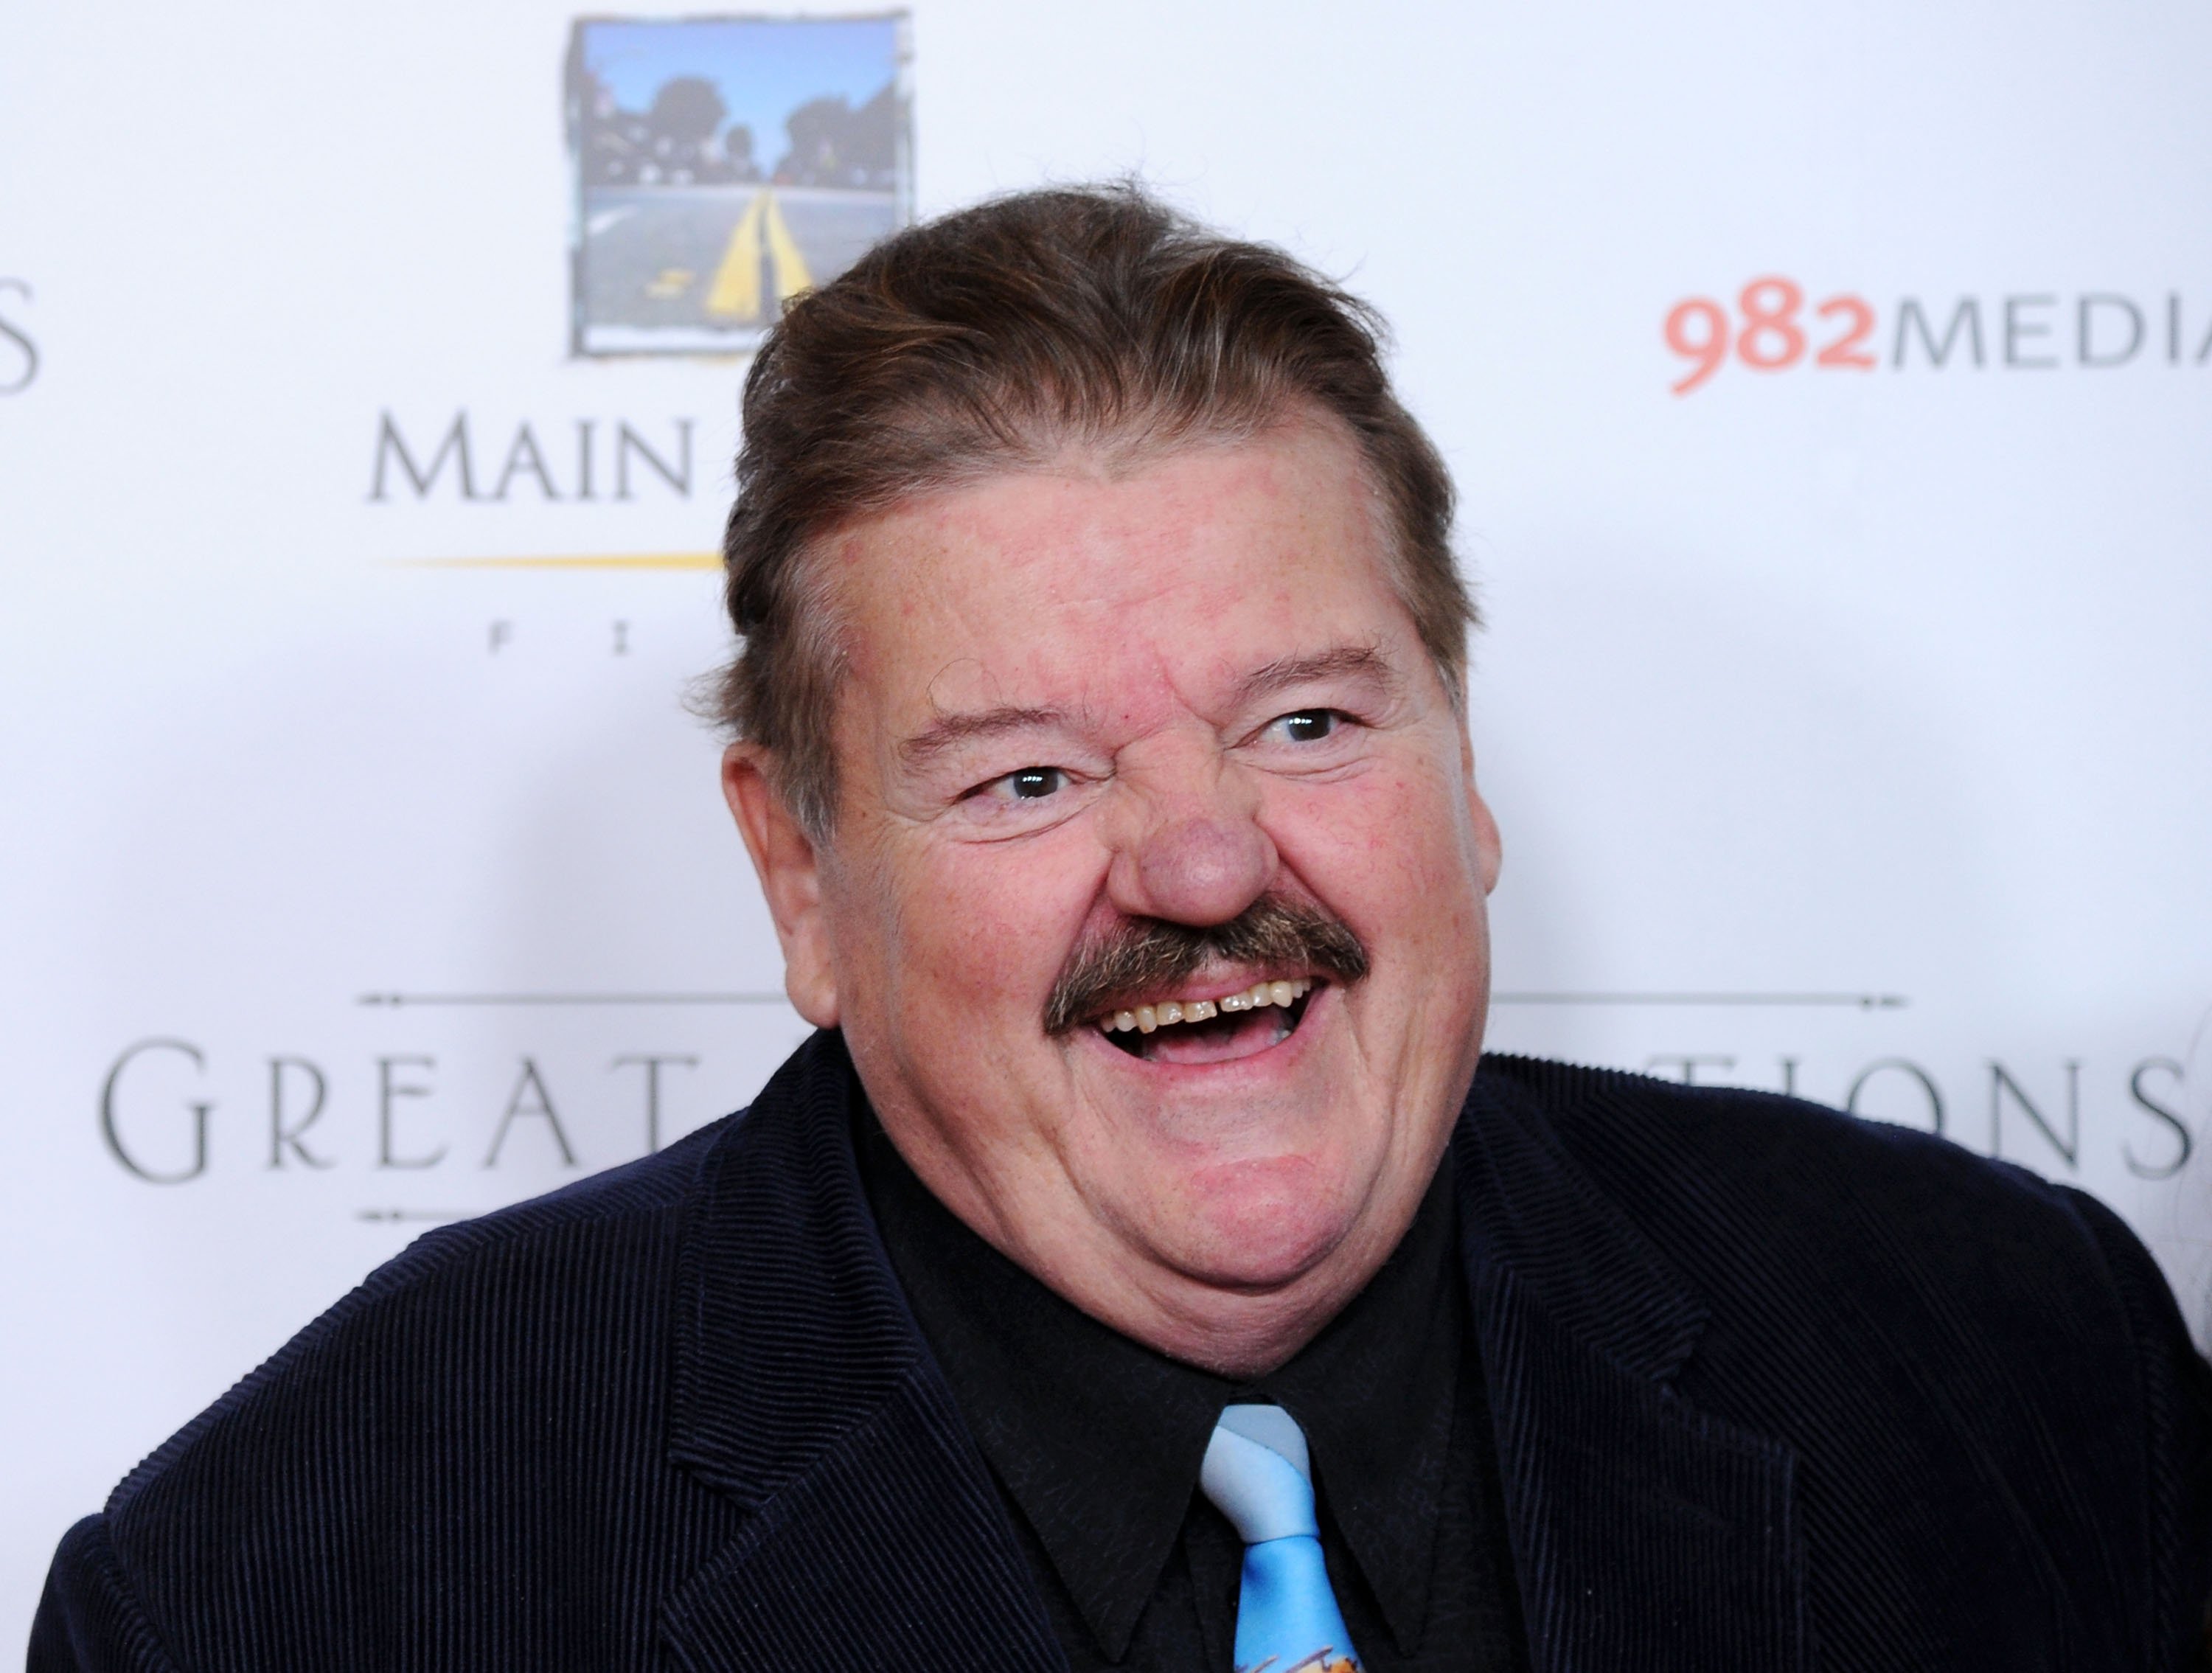 Robbie Coltrane, who starred in the 'Harry Potter' movies, wears a black suit over a black button-up shirt and light blue tie.